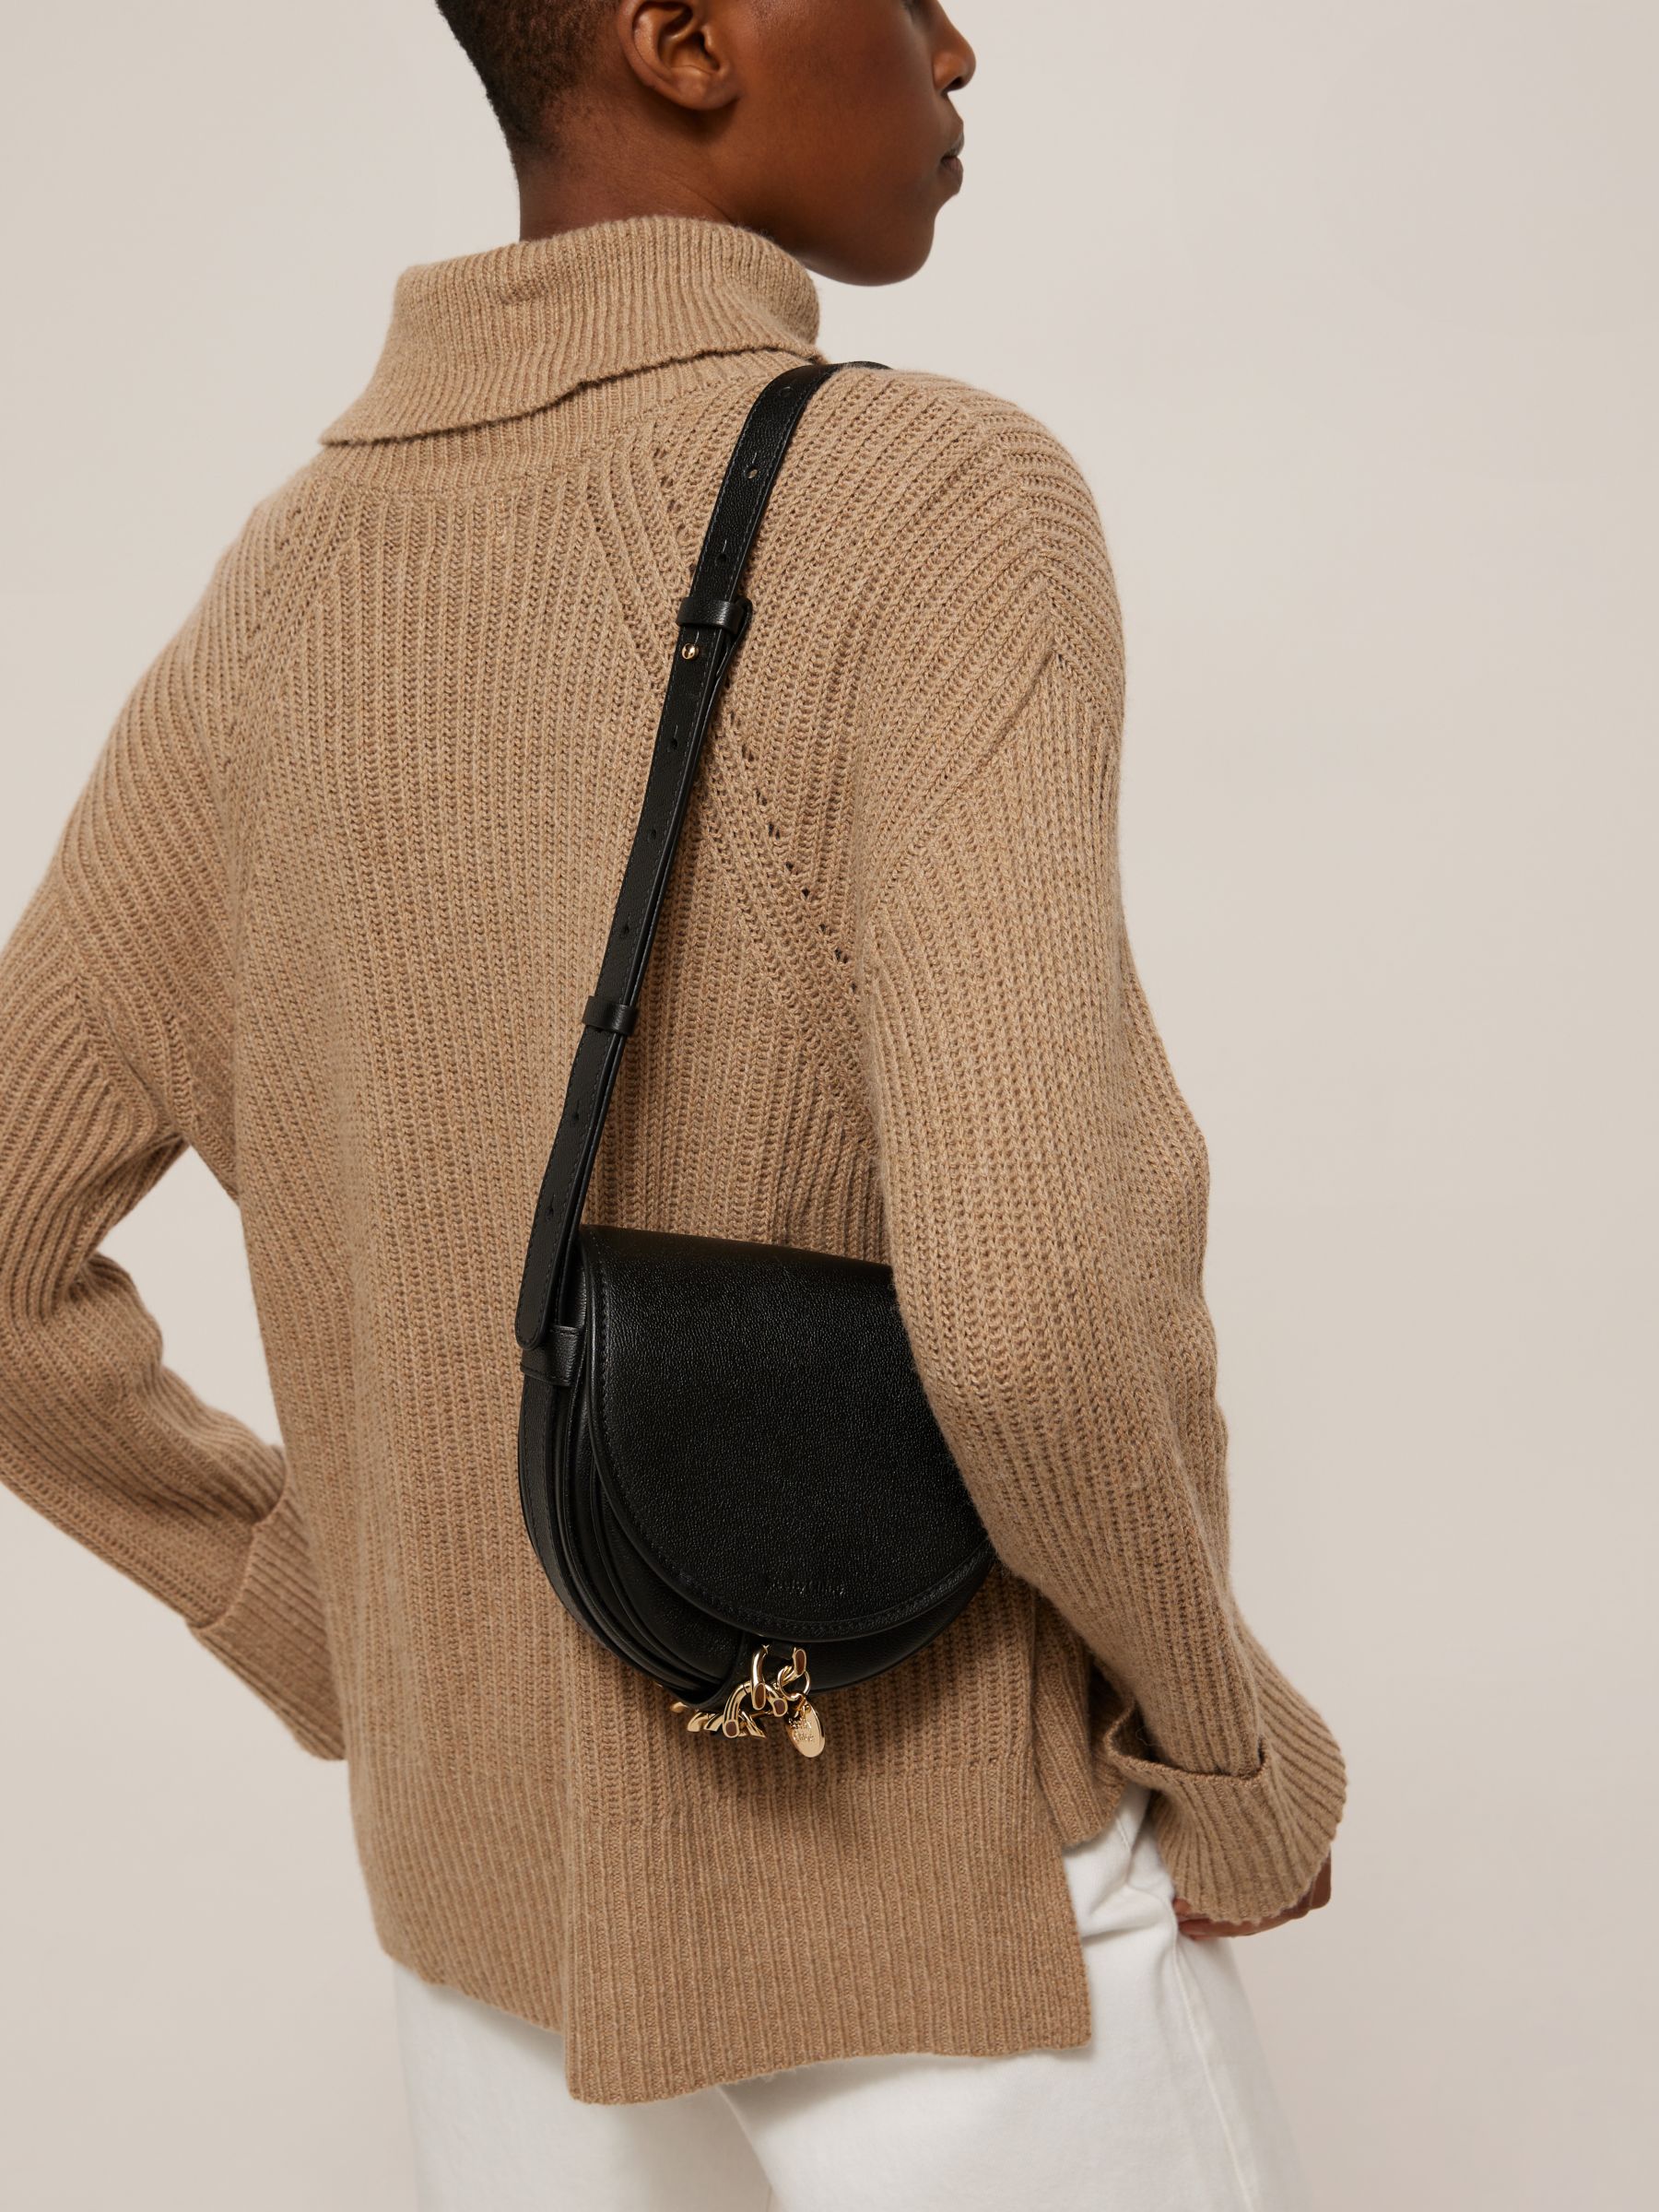 Buy See By Chloé Mara Small Leather Saddle Cross Body Bag Online at johnlewis.com